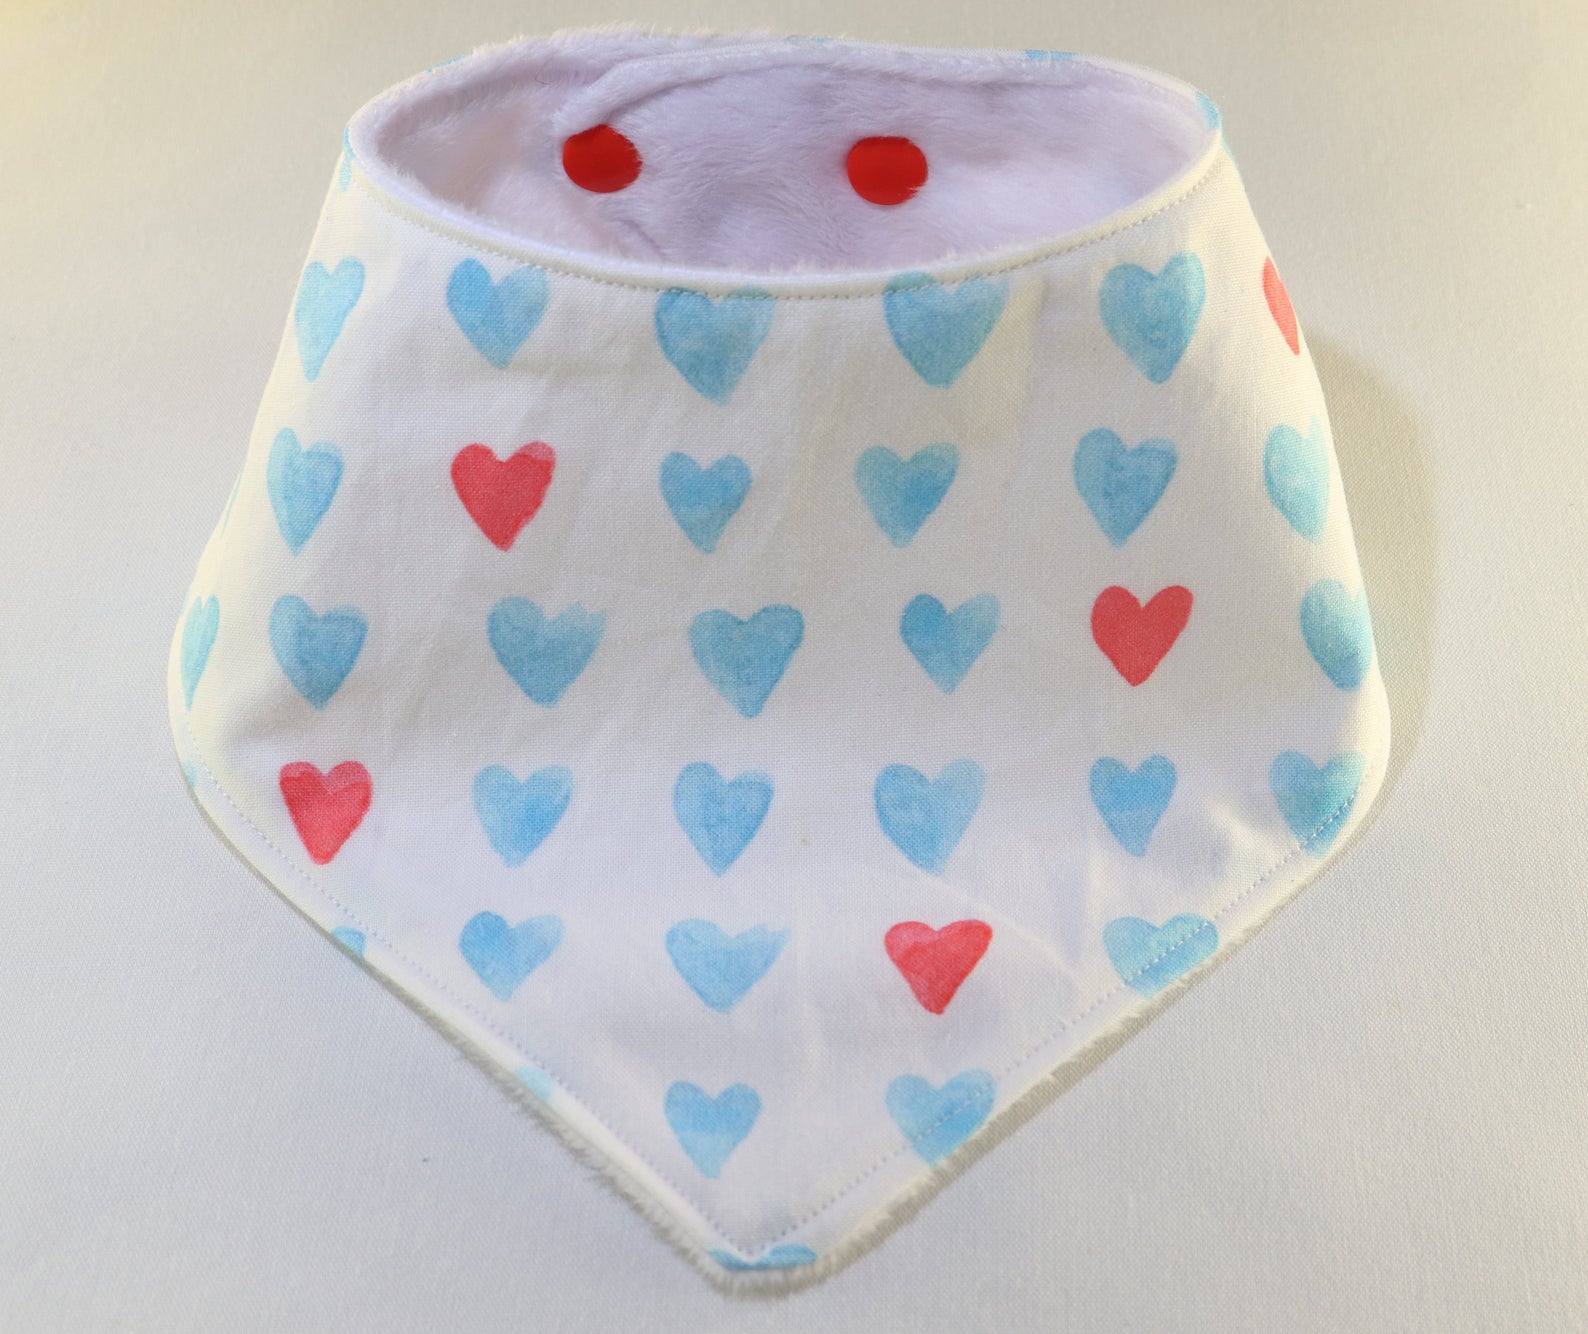 Valentine's Day gifts for babies: Heart bib | The Blooming Indigo Etsy shop